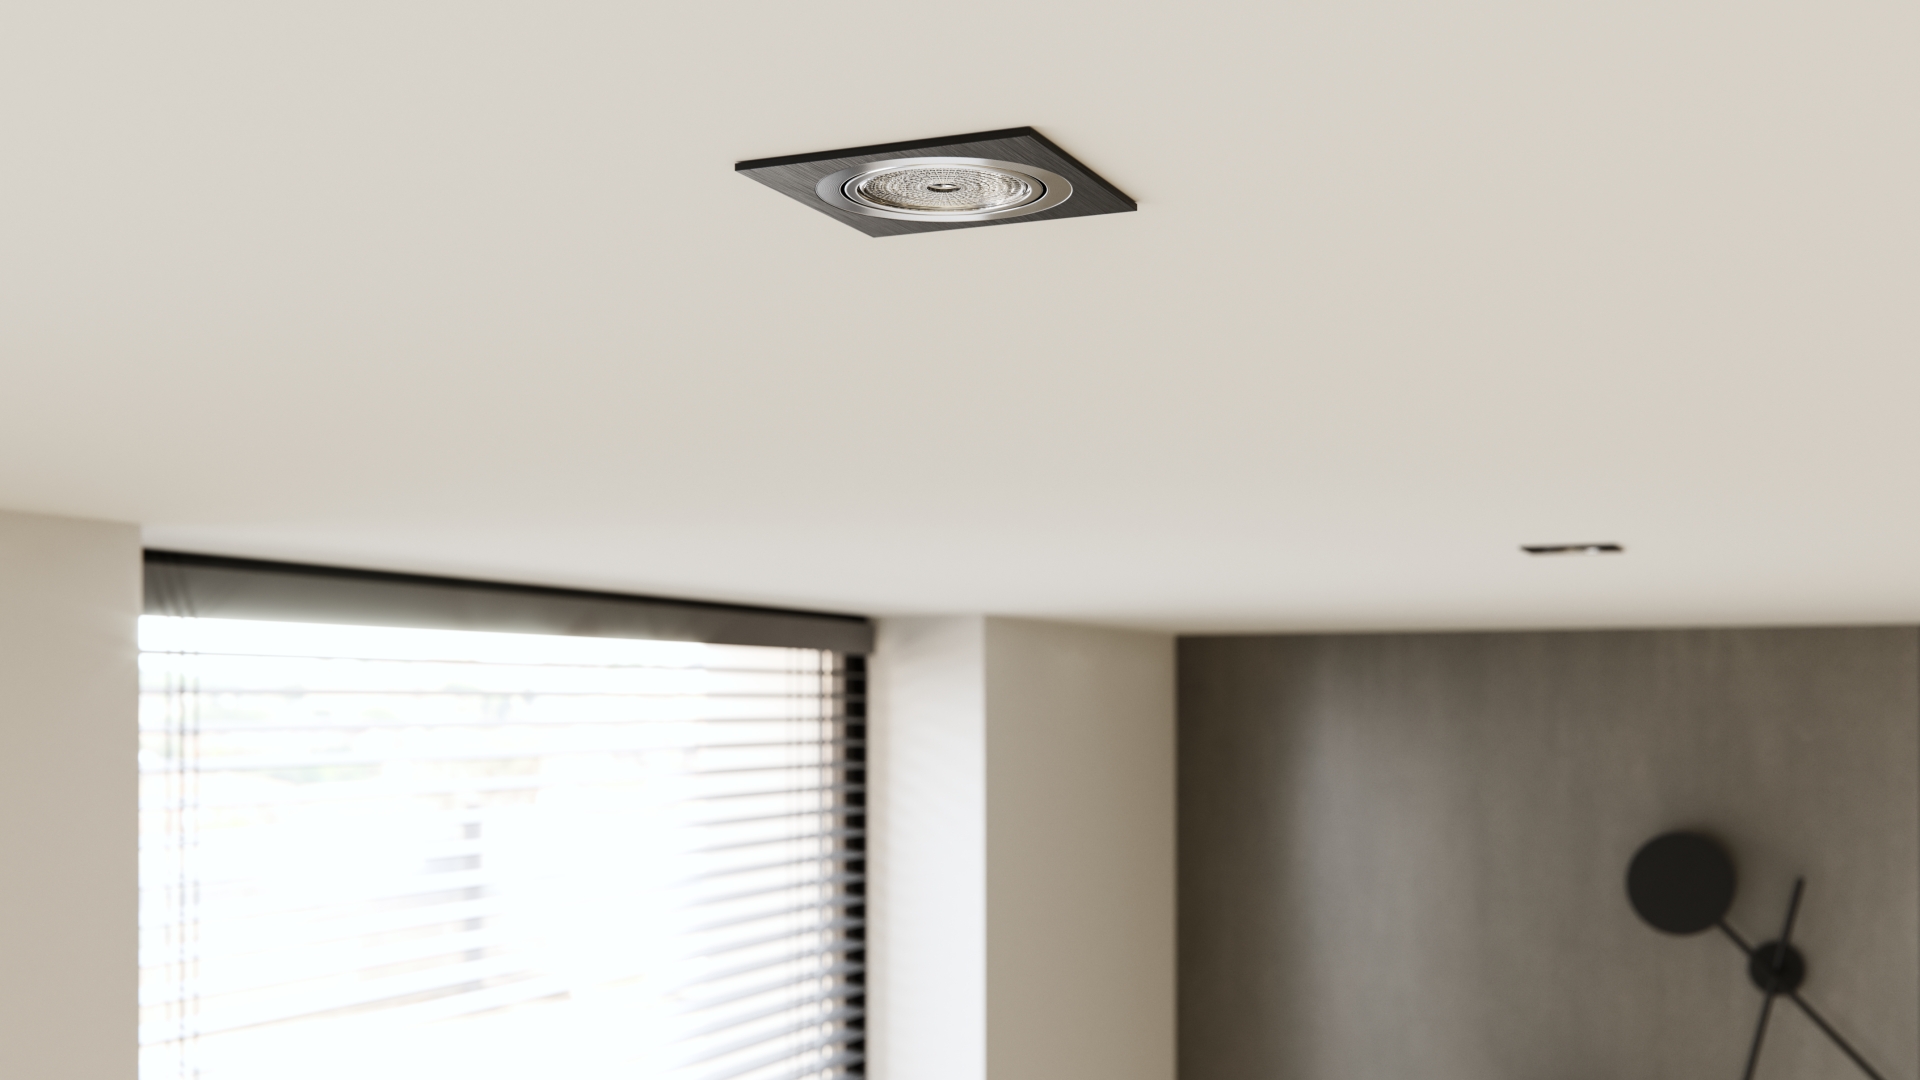 Brushed recessed ceiling light